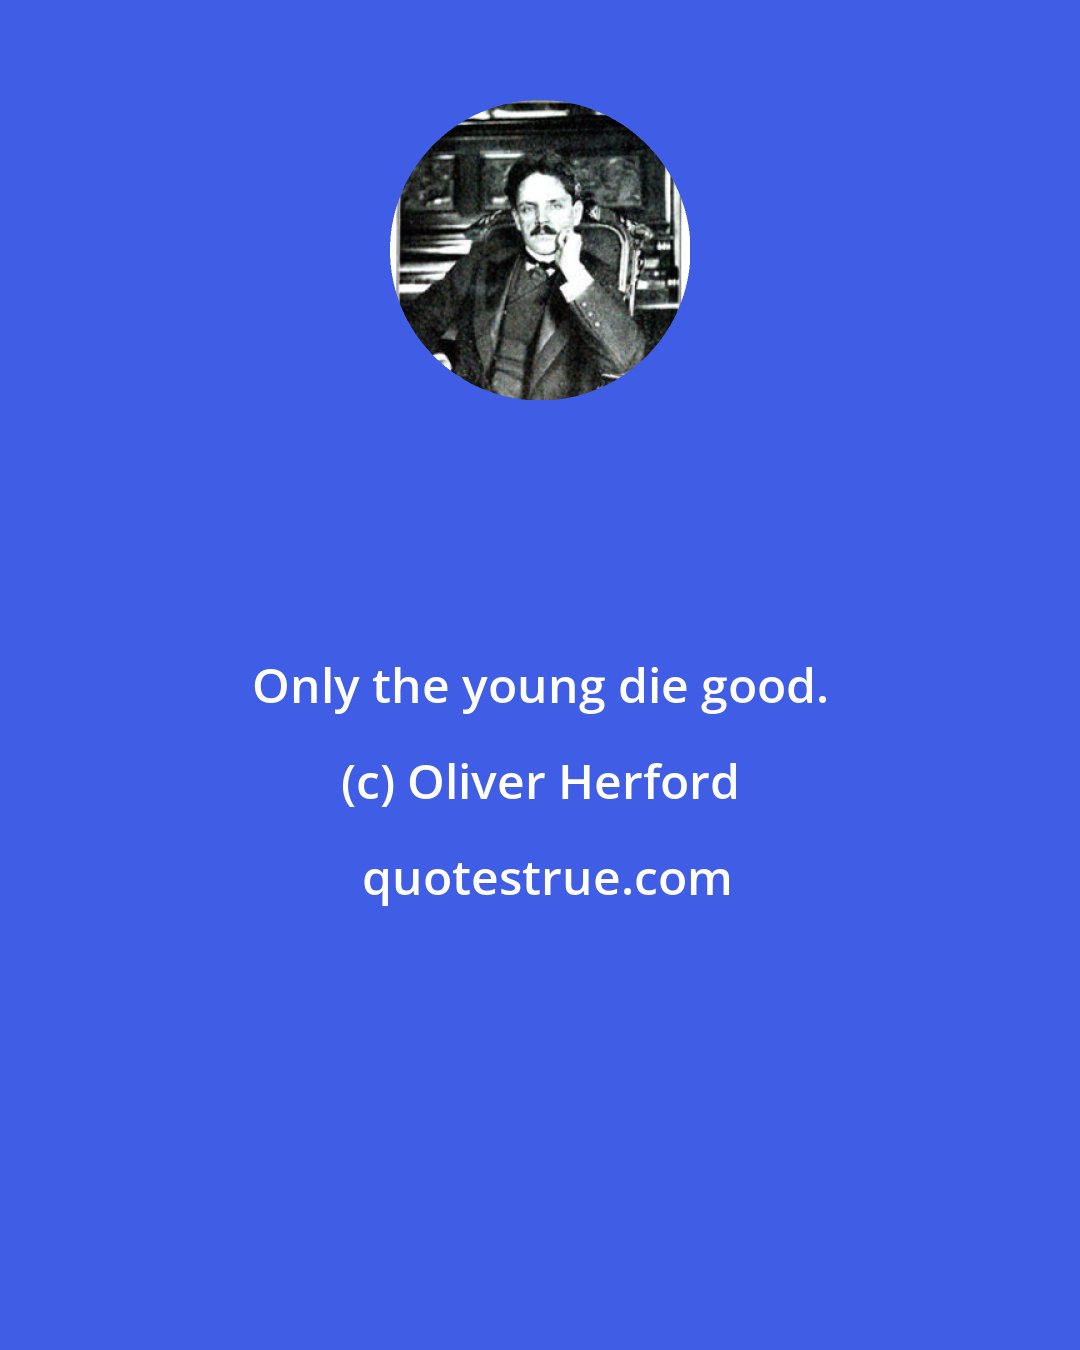 Oliver Herford: Only the young die good.